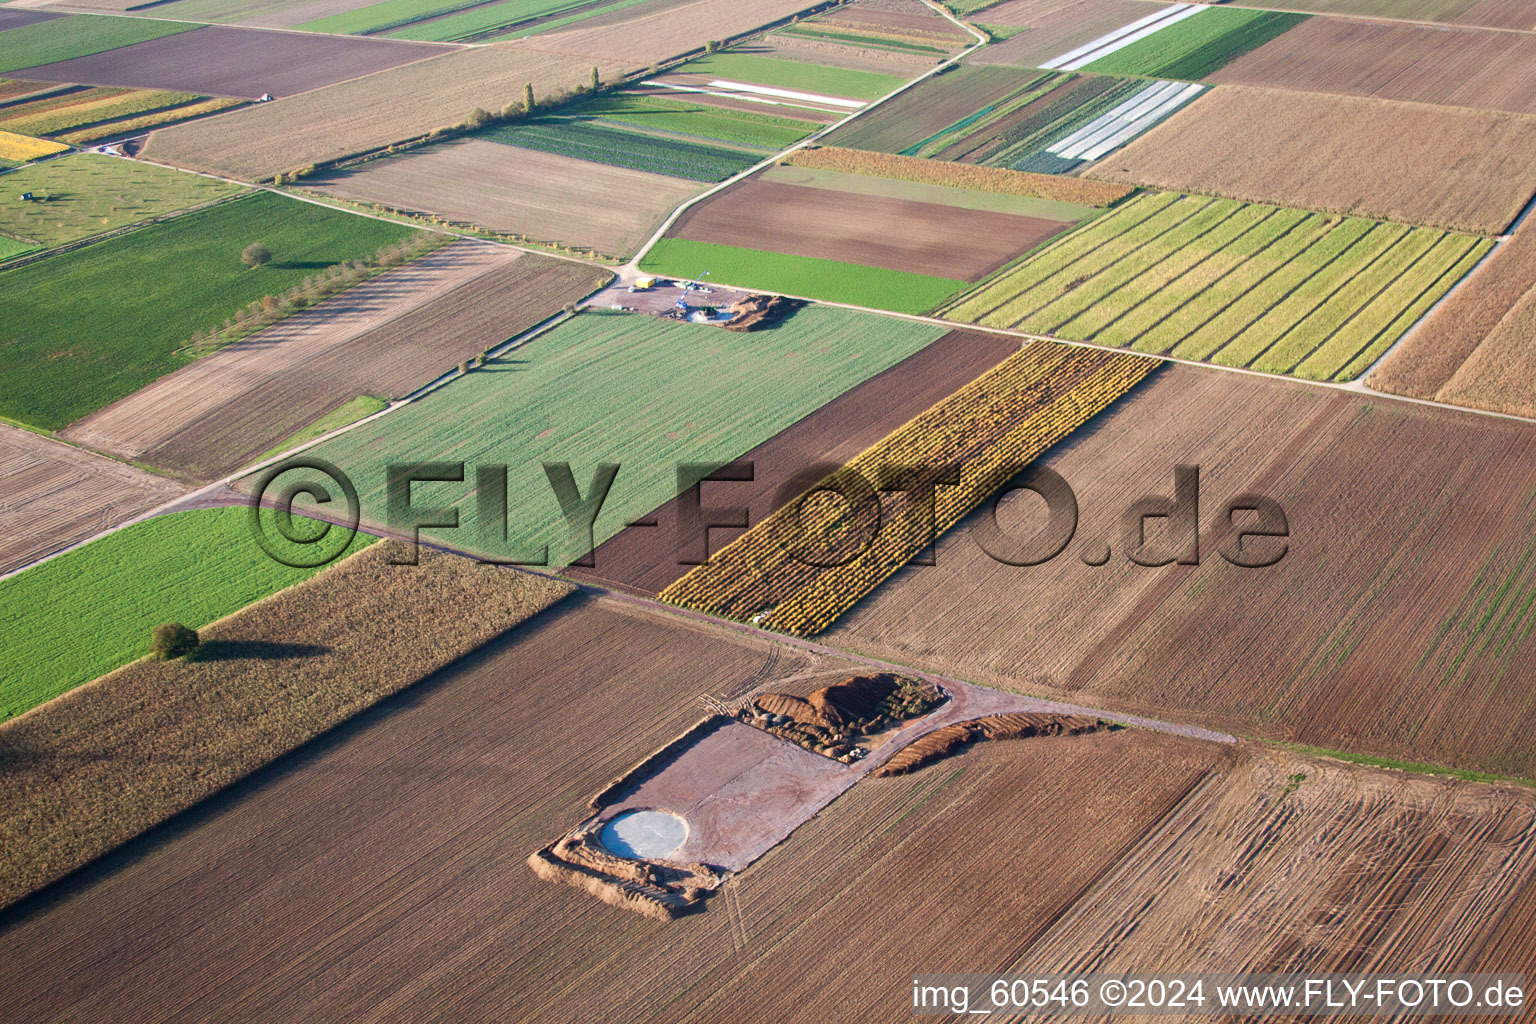 Aerial view of Wind turbine foundations in Offenbach an der Queich in the state Rhineland-Palatinate, Germany